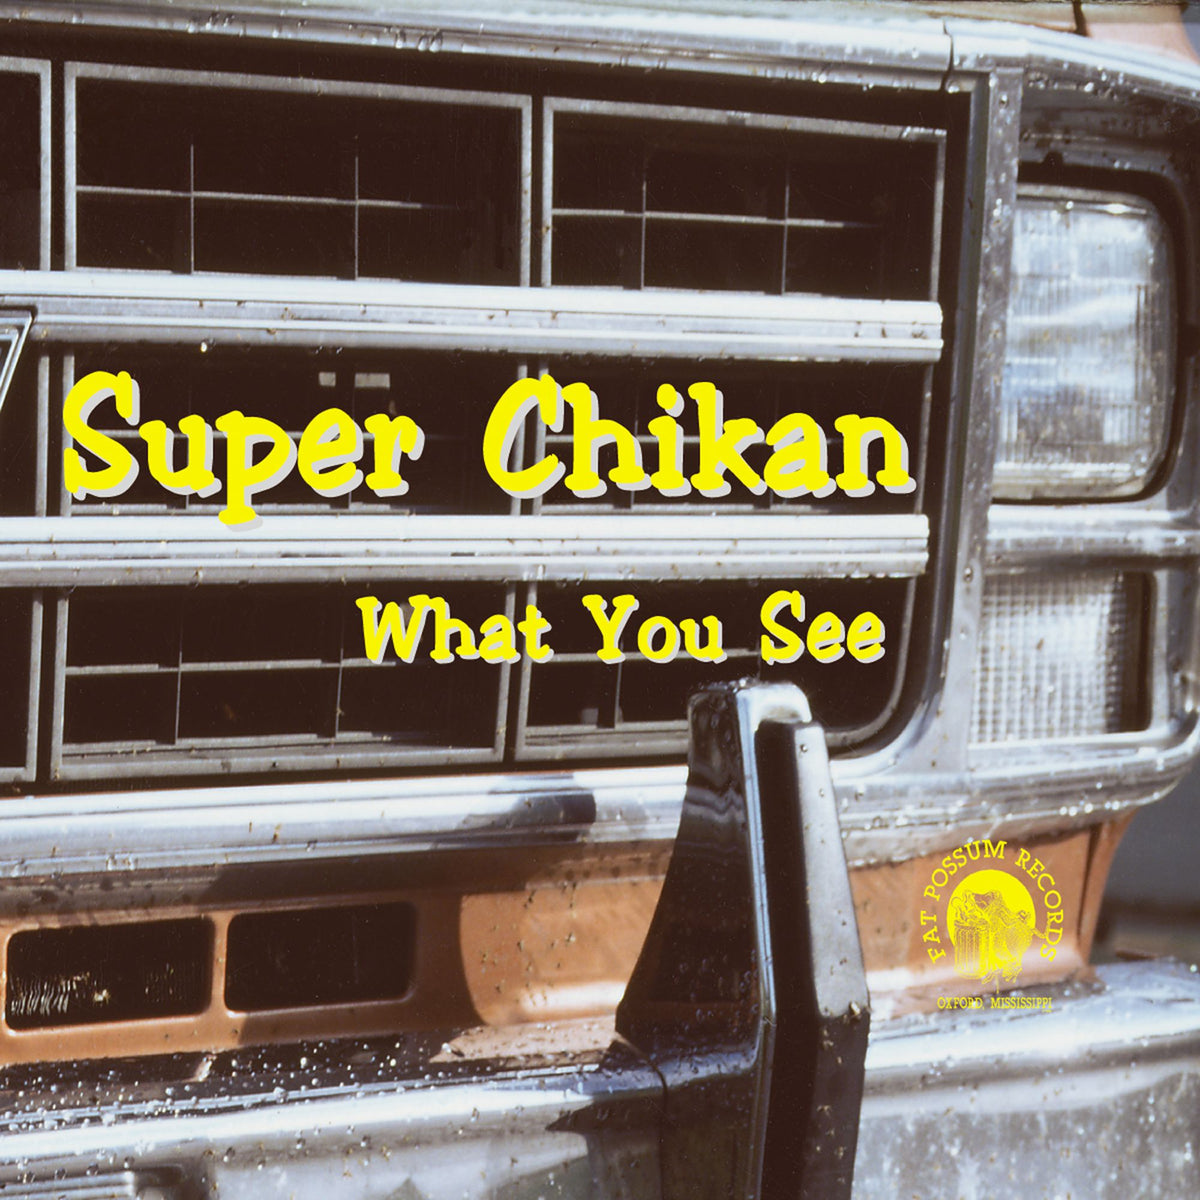 SUPER CHIKAN: What You See